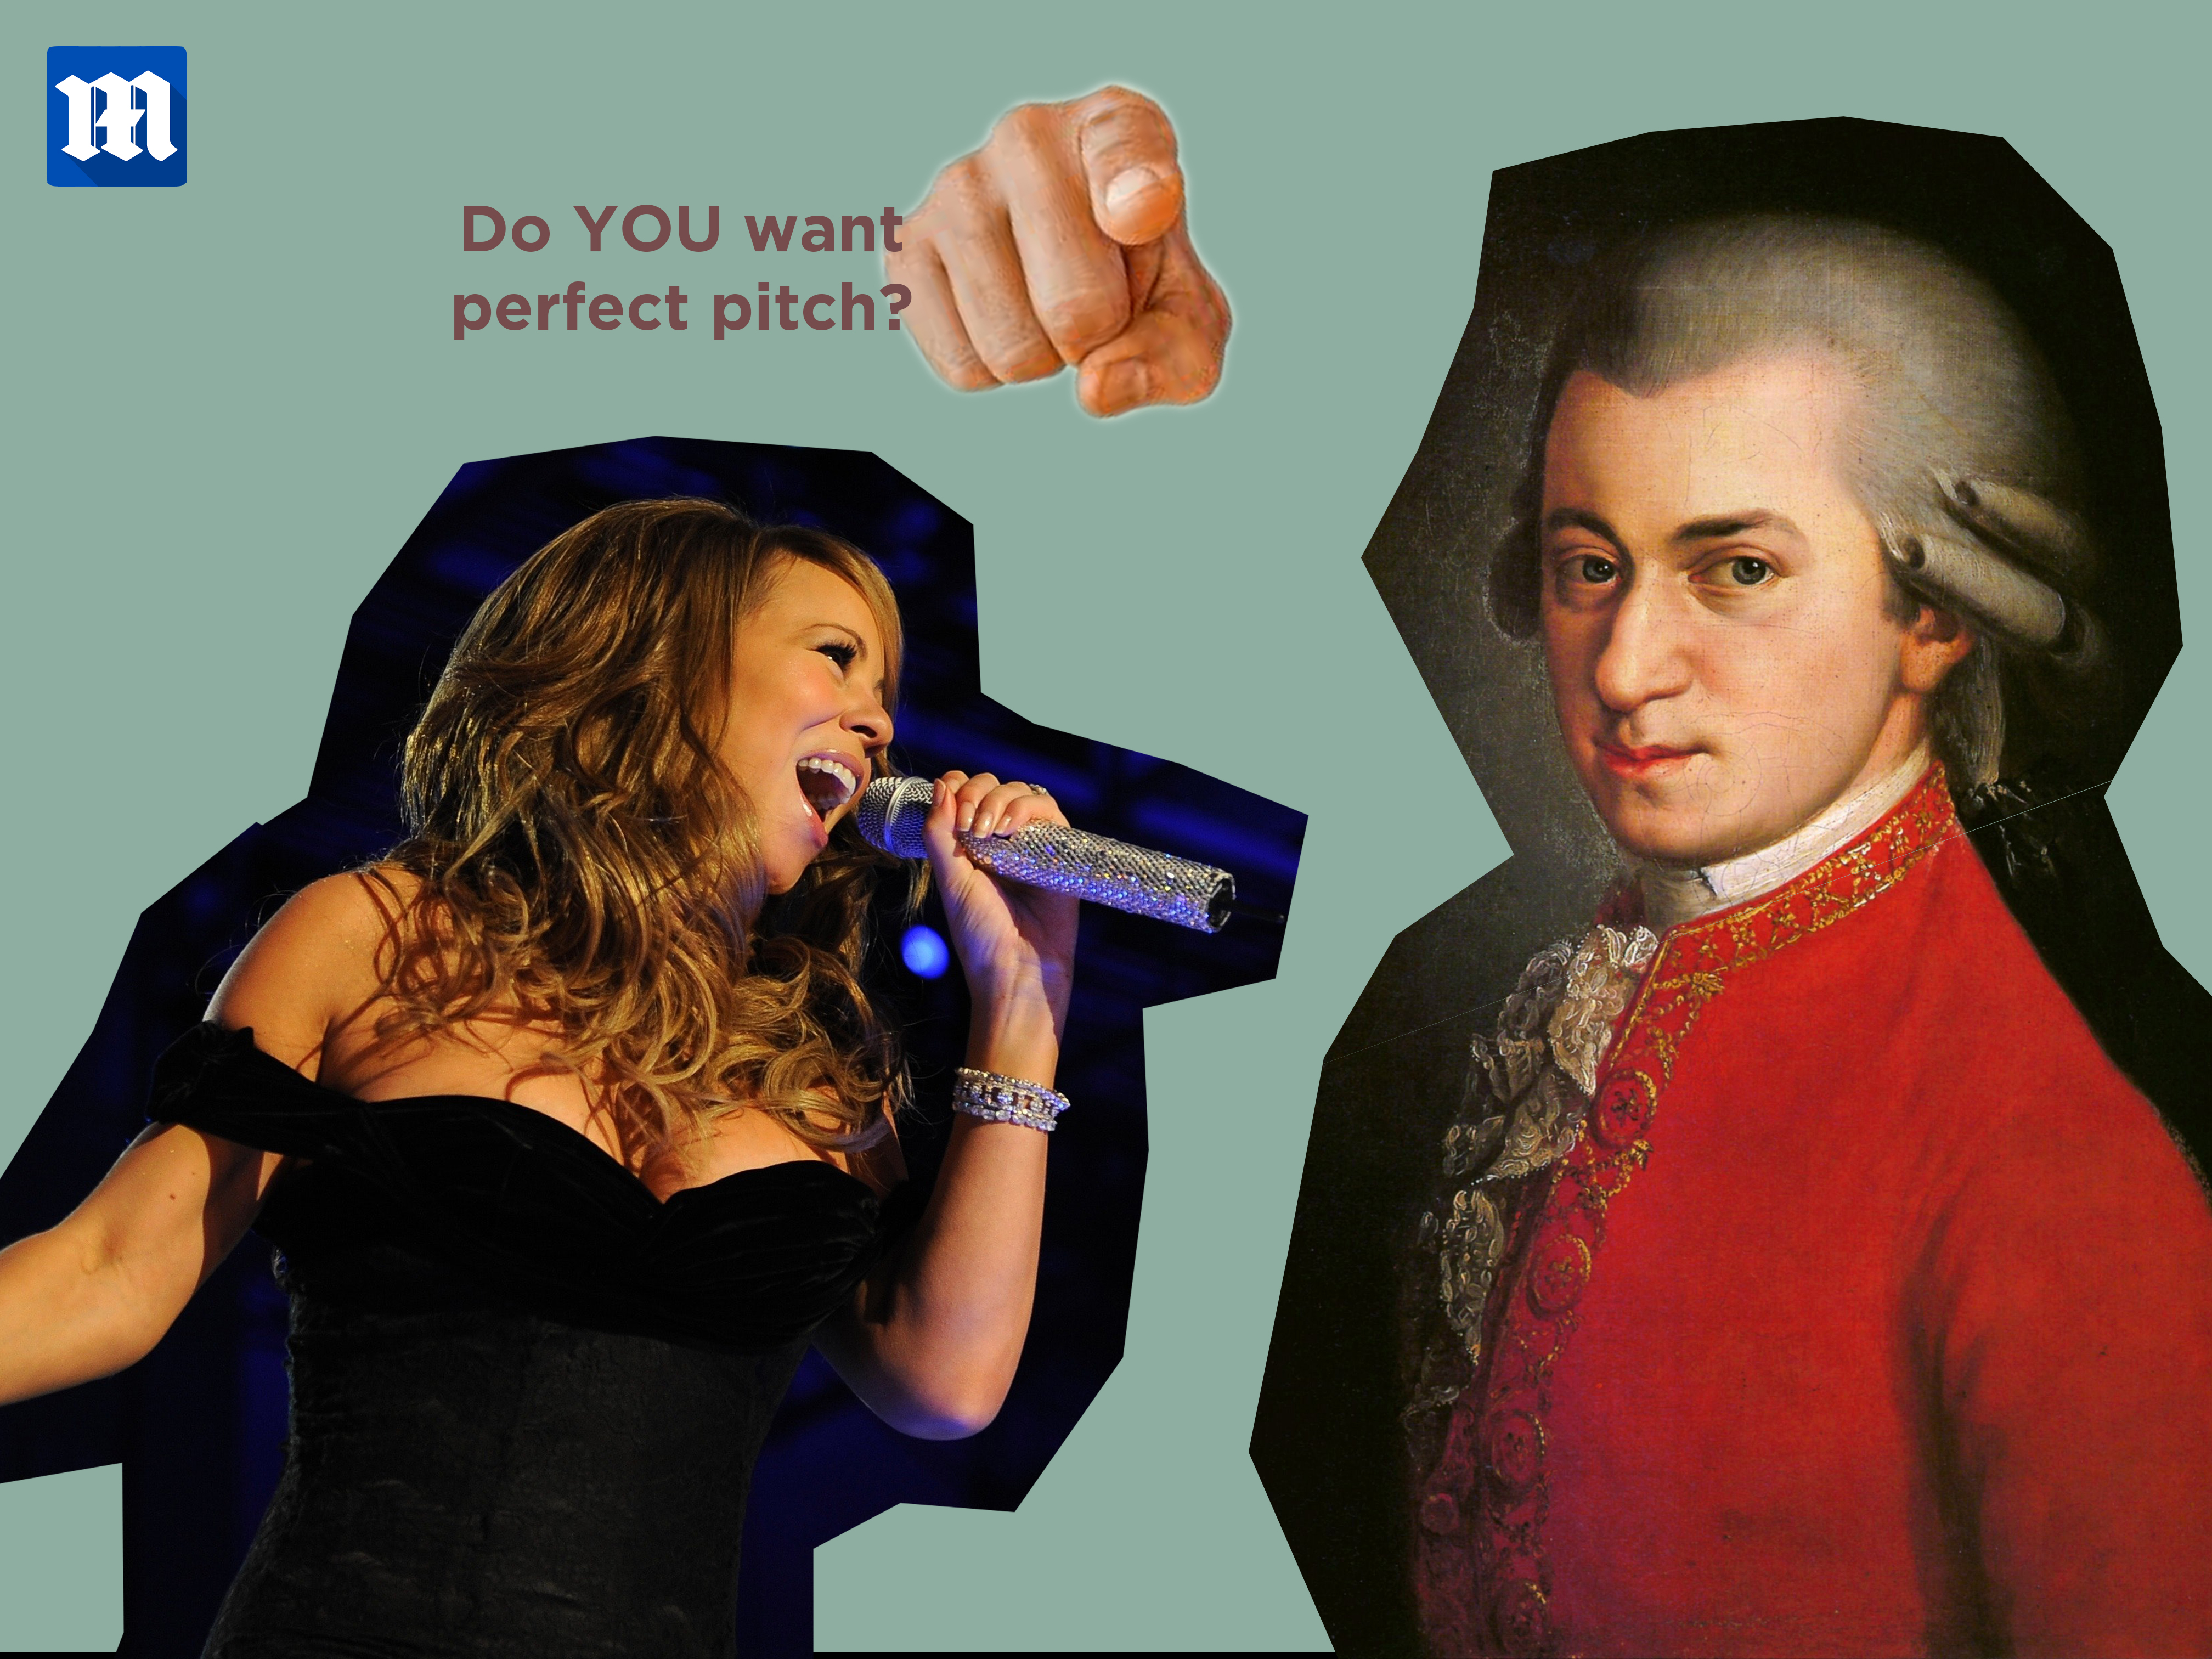 Mariah Carey and Mozart are pictured together with a caption that says 'Do YOU want perfect pitch?'